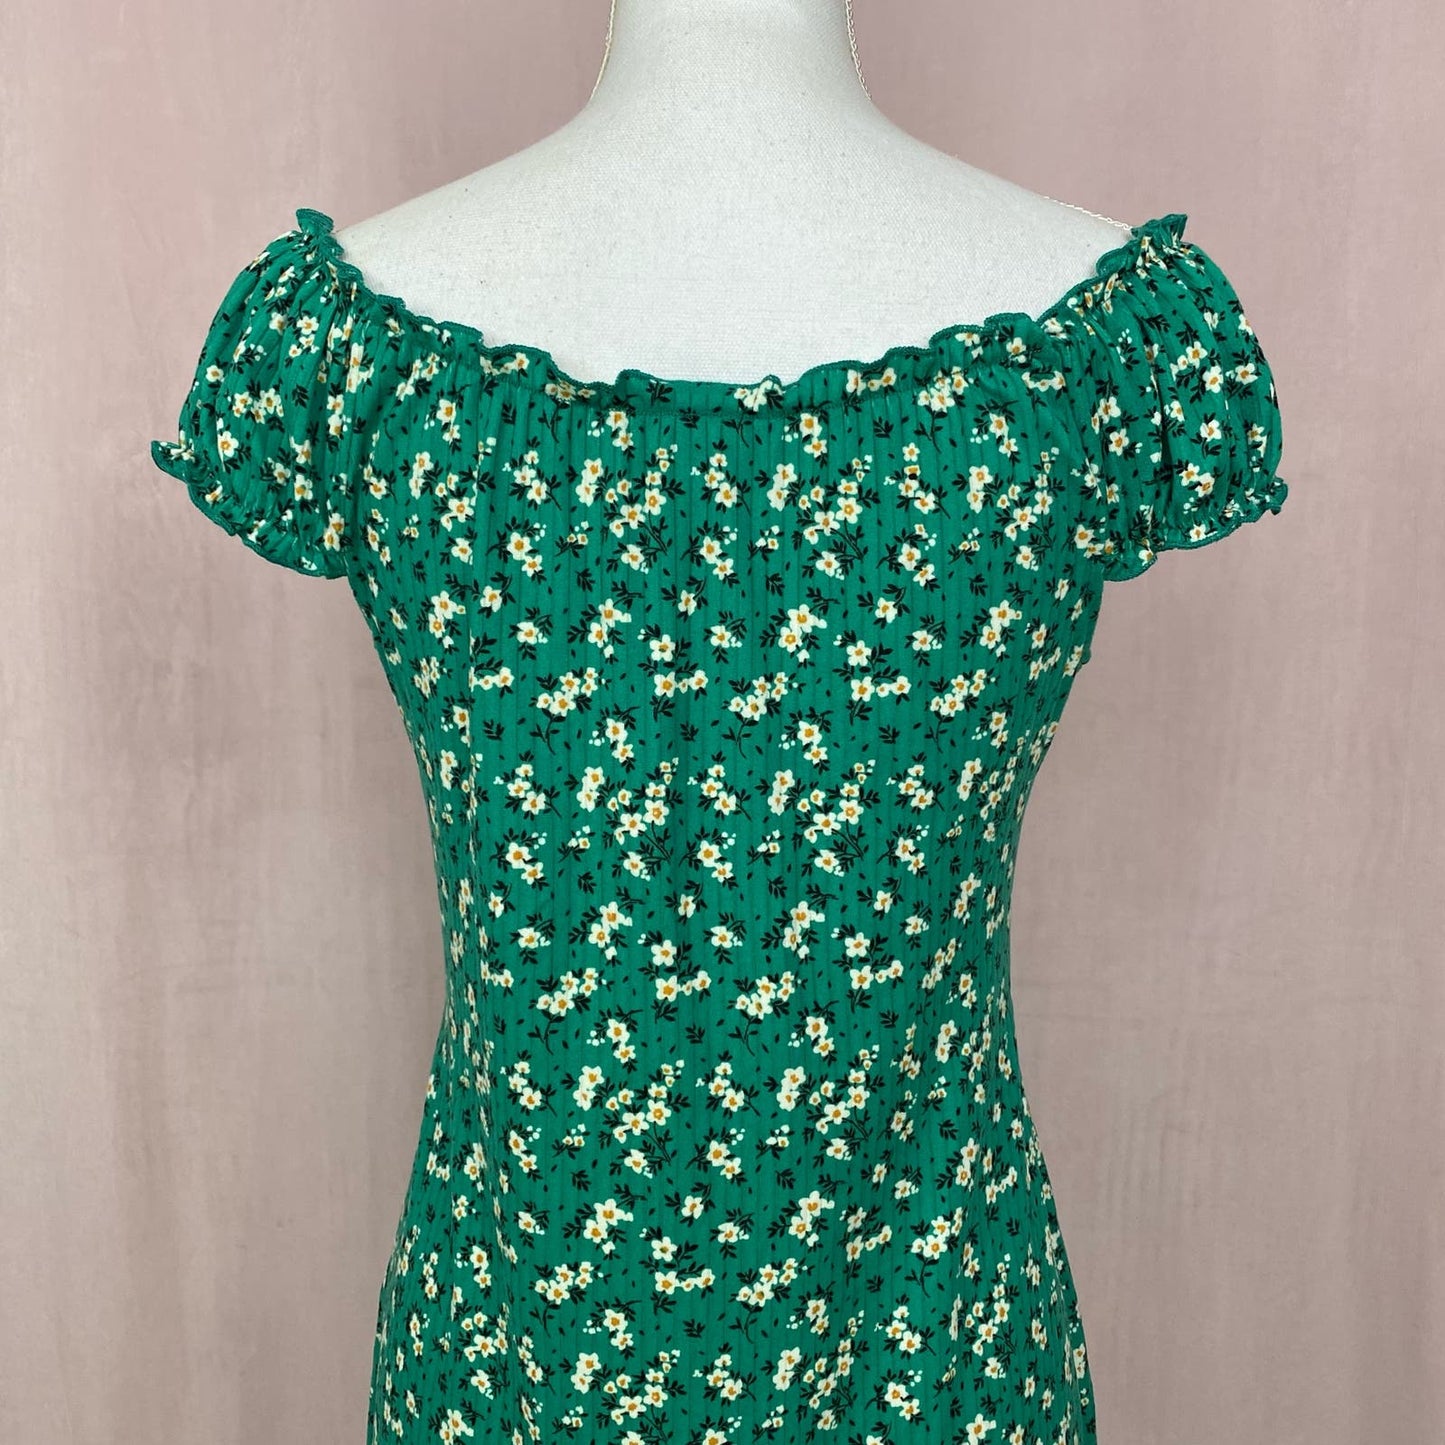 Secondhand Lily Bleu Green Ditsy Floral Tie Front Mini Dress, Size Medium